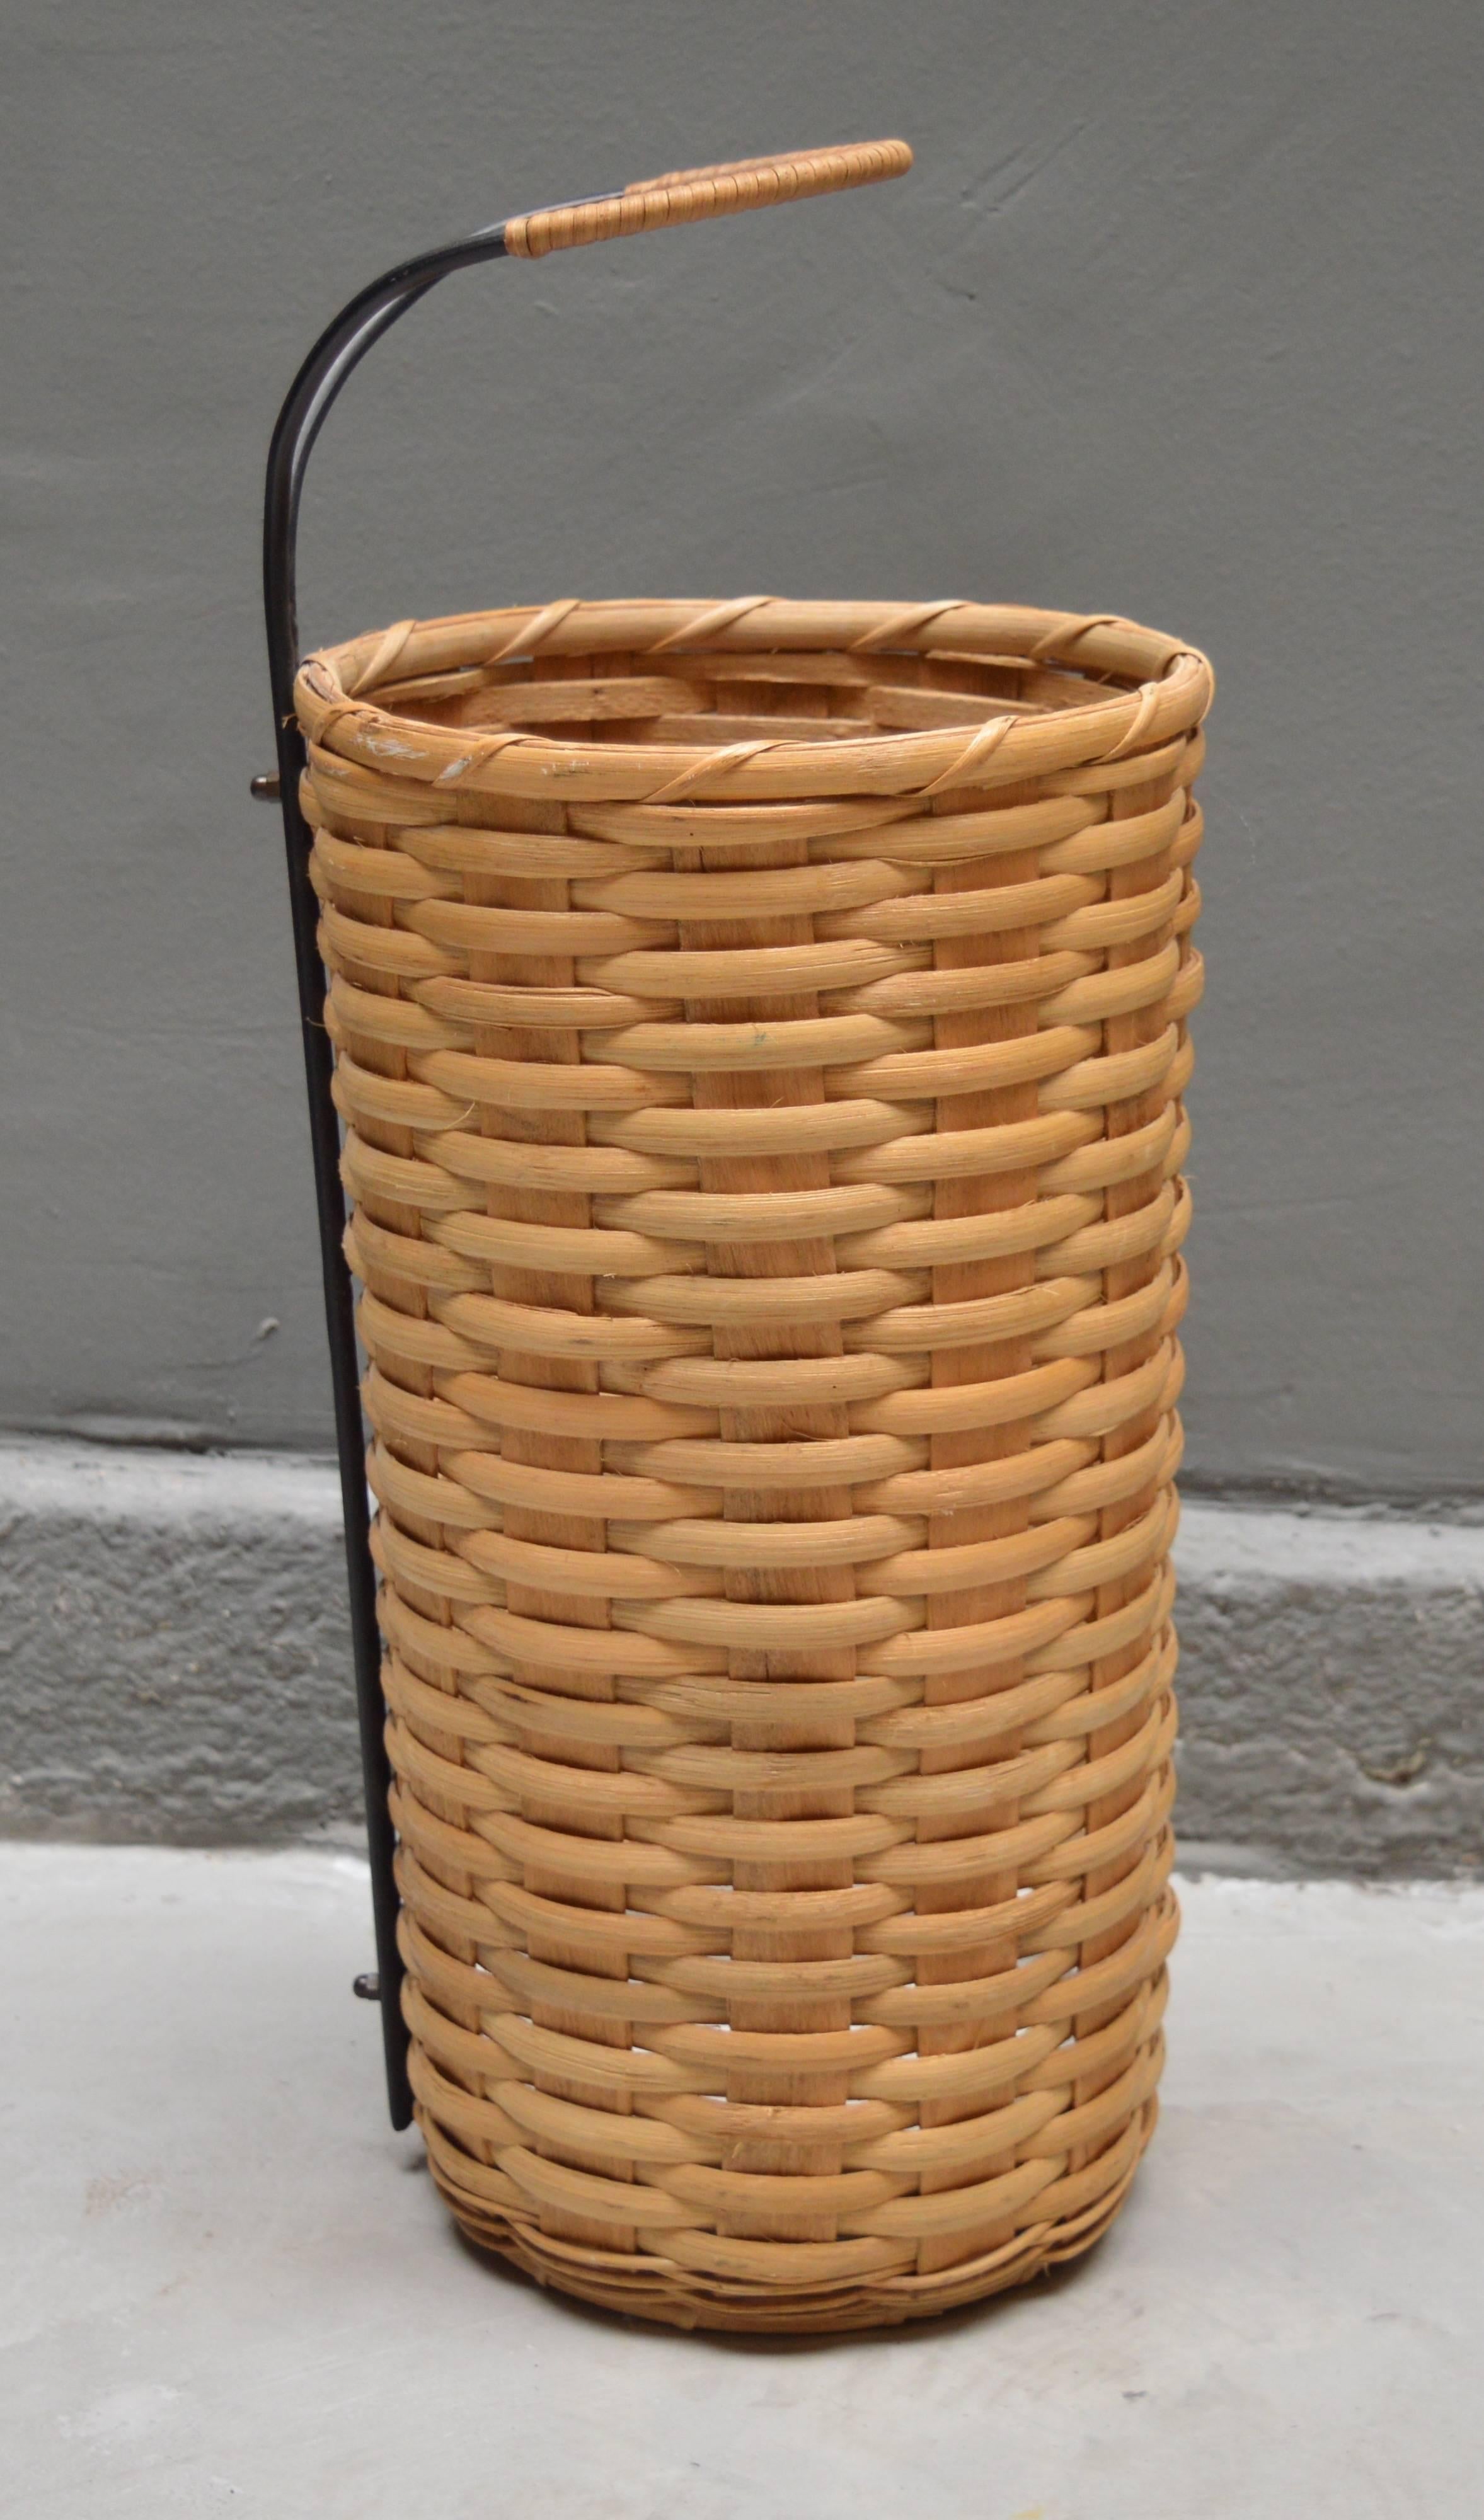 German umbrella stand made of rattan and iron. White ceramic dish inside to catch water. Excellent vintage condition.